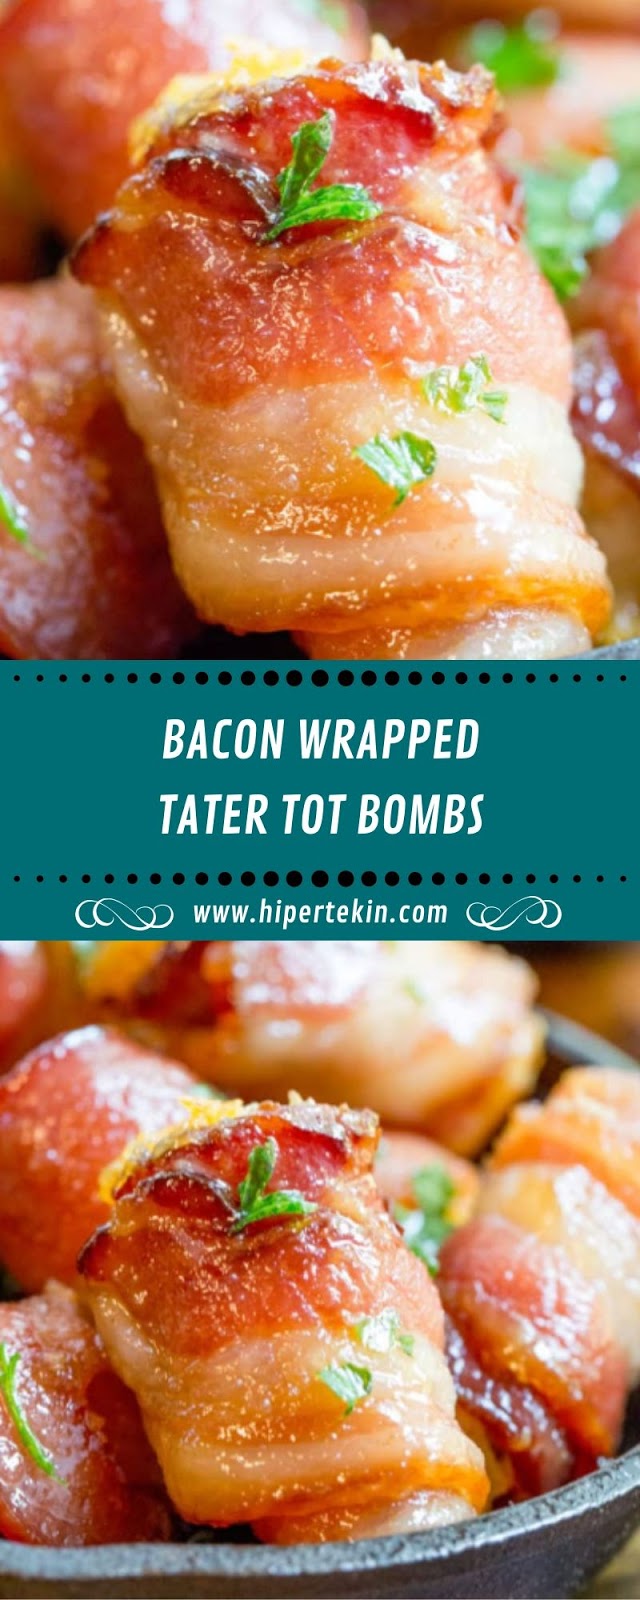 BACON WRAPPED TATER TOT BOMBS